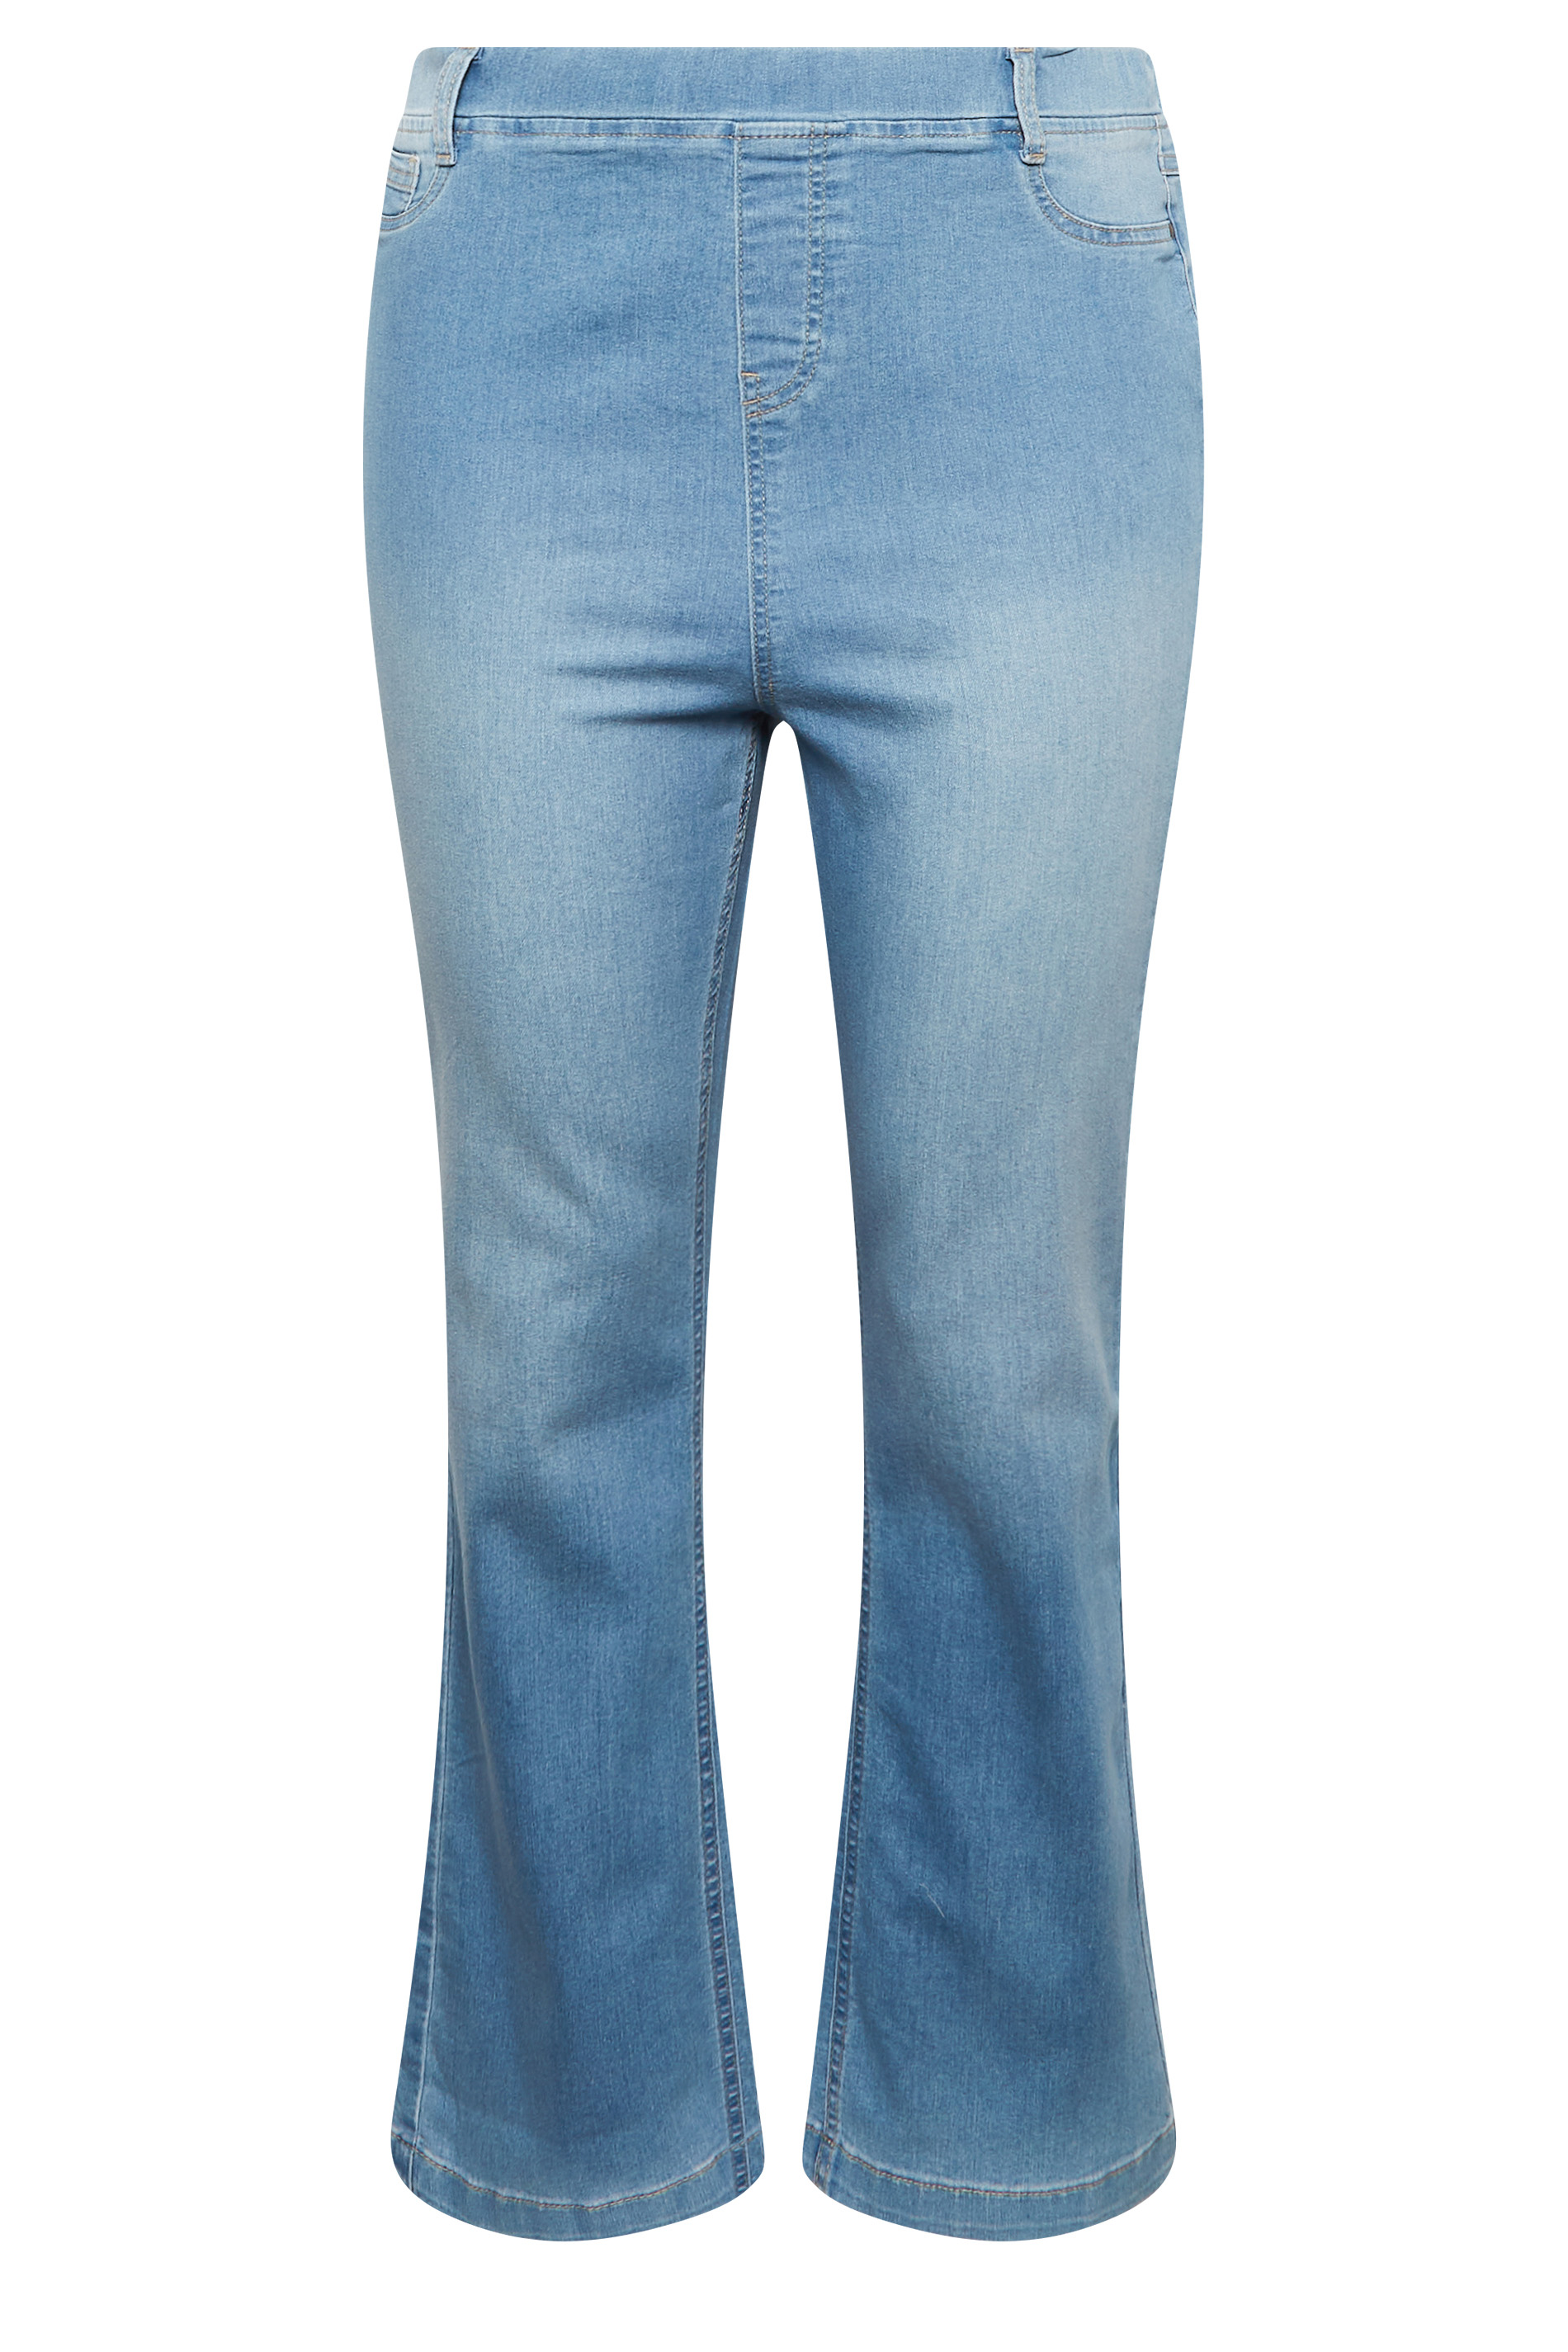 YOURS Plus Size Curve Light Blue Bootcut Jeggings | Yours Clothing